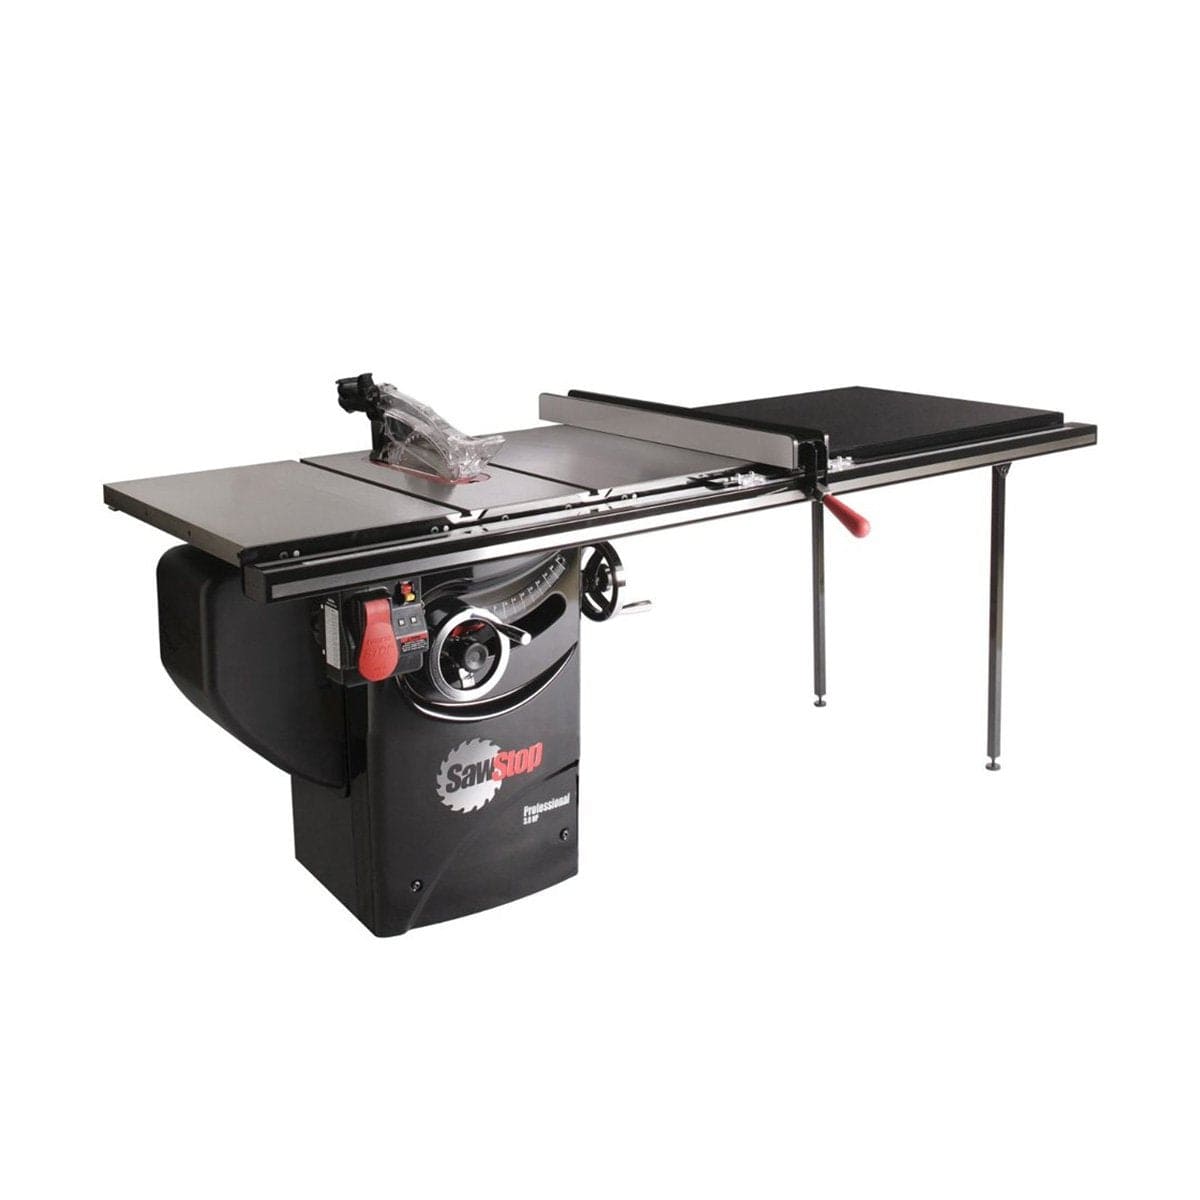 SawStop PCS31230-TGP252 Table Saw 10" Professional Cabinet Saw 52" Fence 3HP 1-Phase